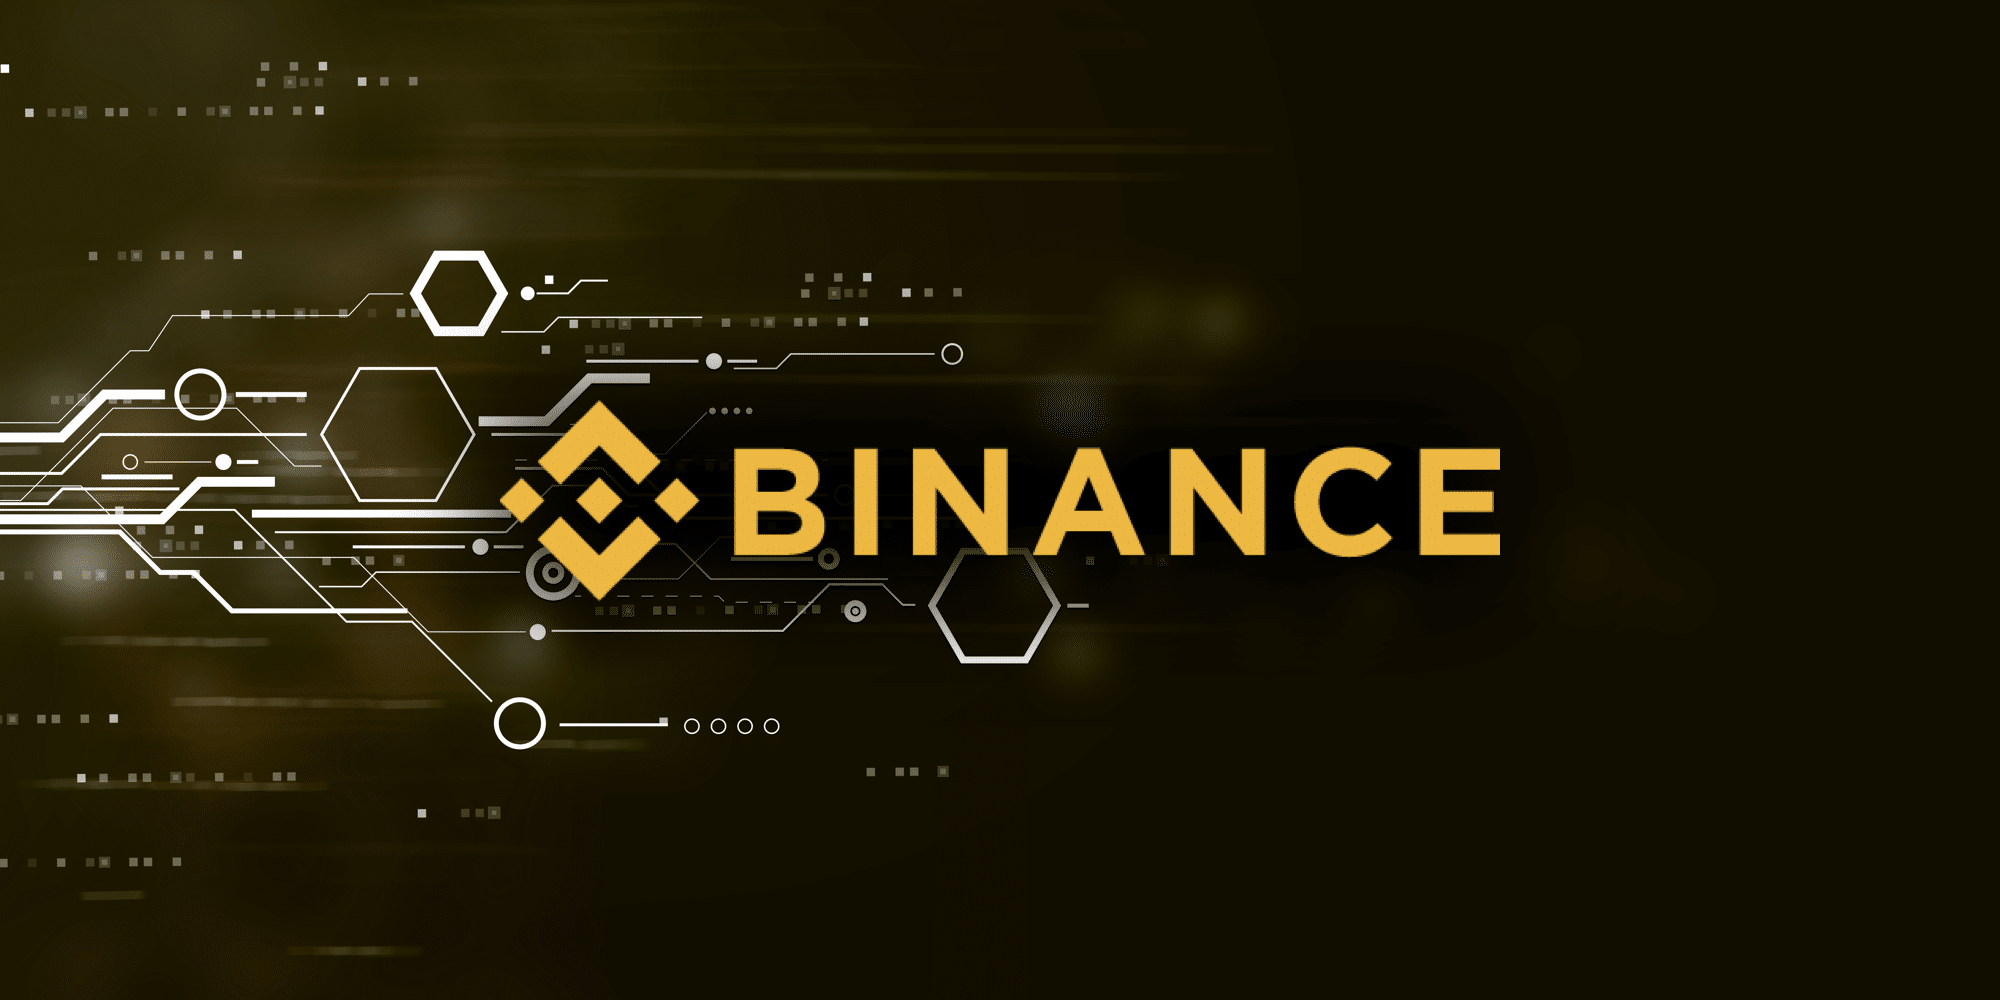 Binance reported to face warning from Japan's financial regulators, CEO responds [UPDATED]